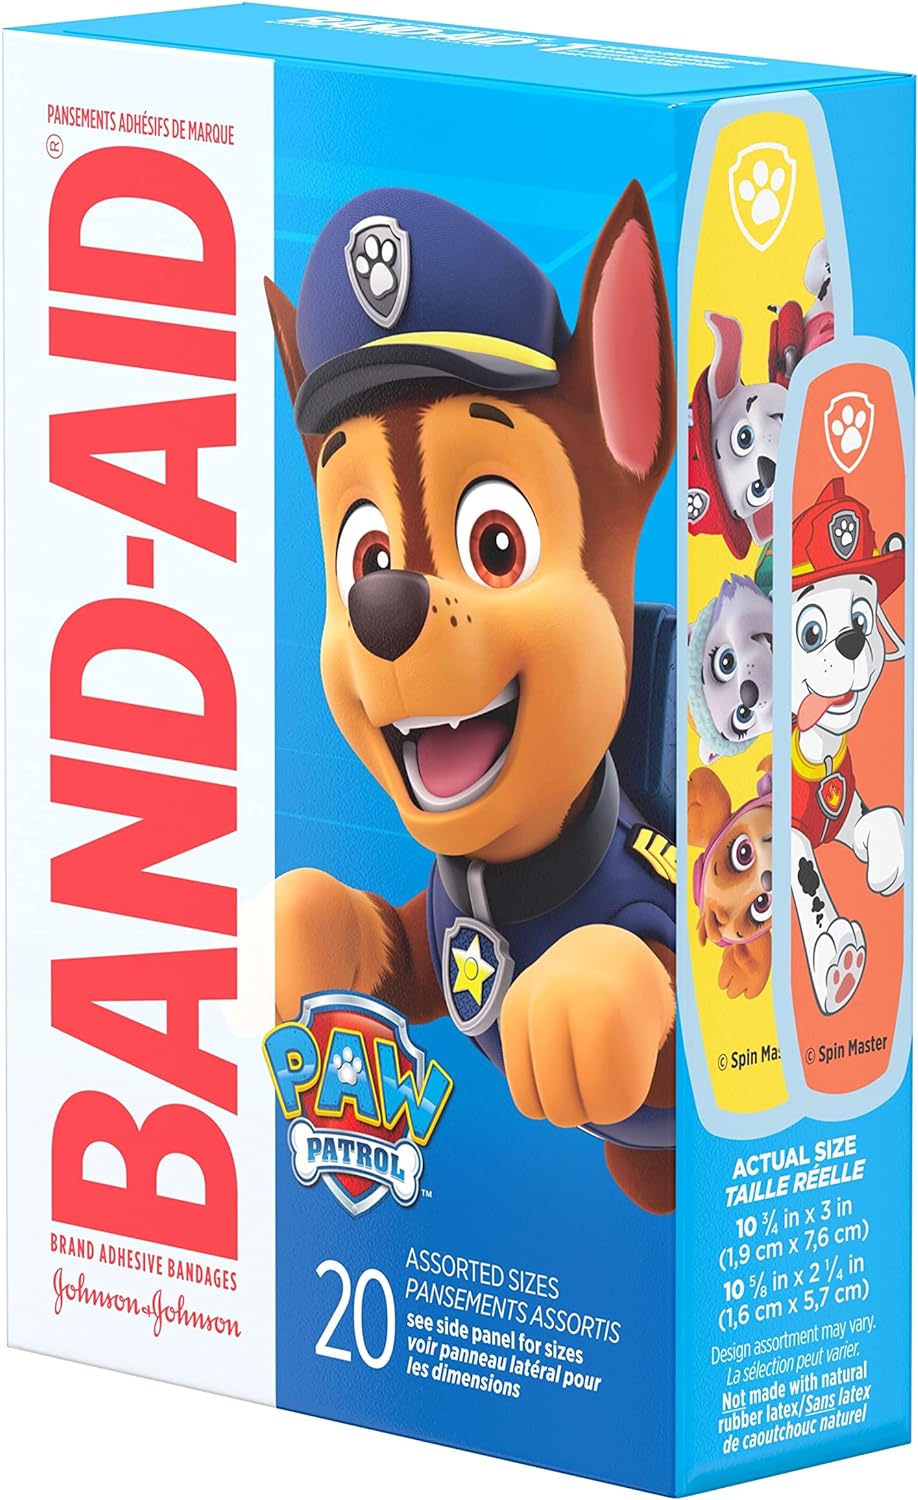 Band-Aid Brand Adhesive Individually Wrapped Bandages for Kids Featuring Nickelodeon PAW Patrol Characters, Assorted Sizes 20 ct